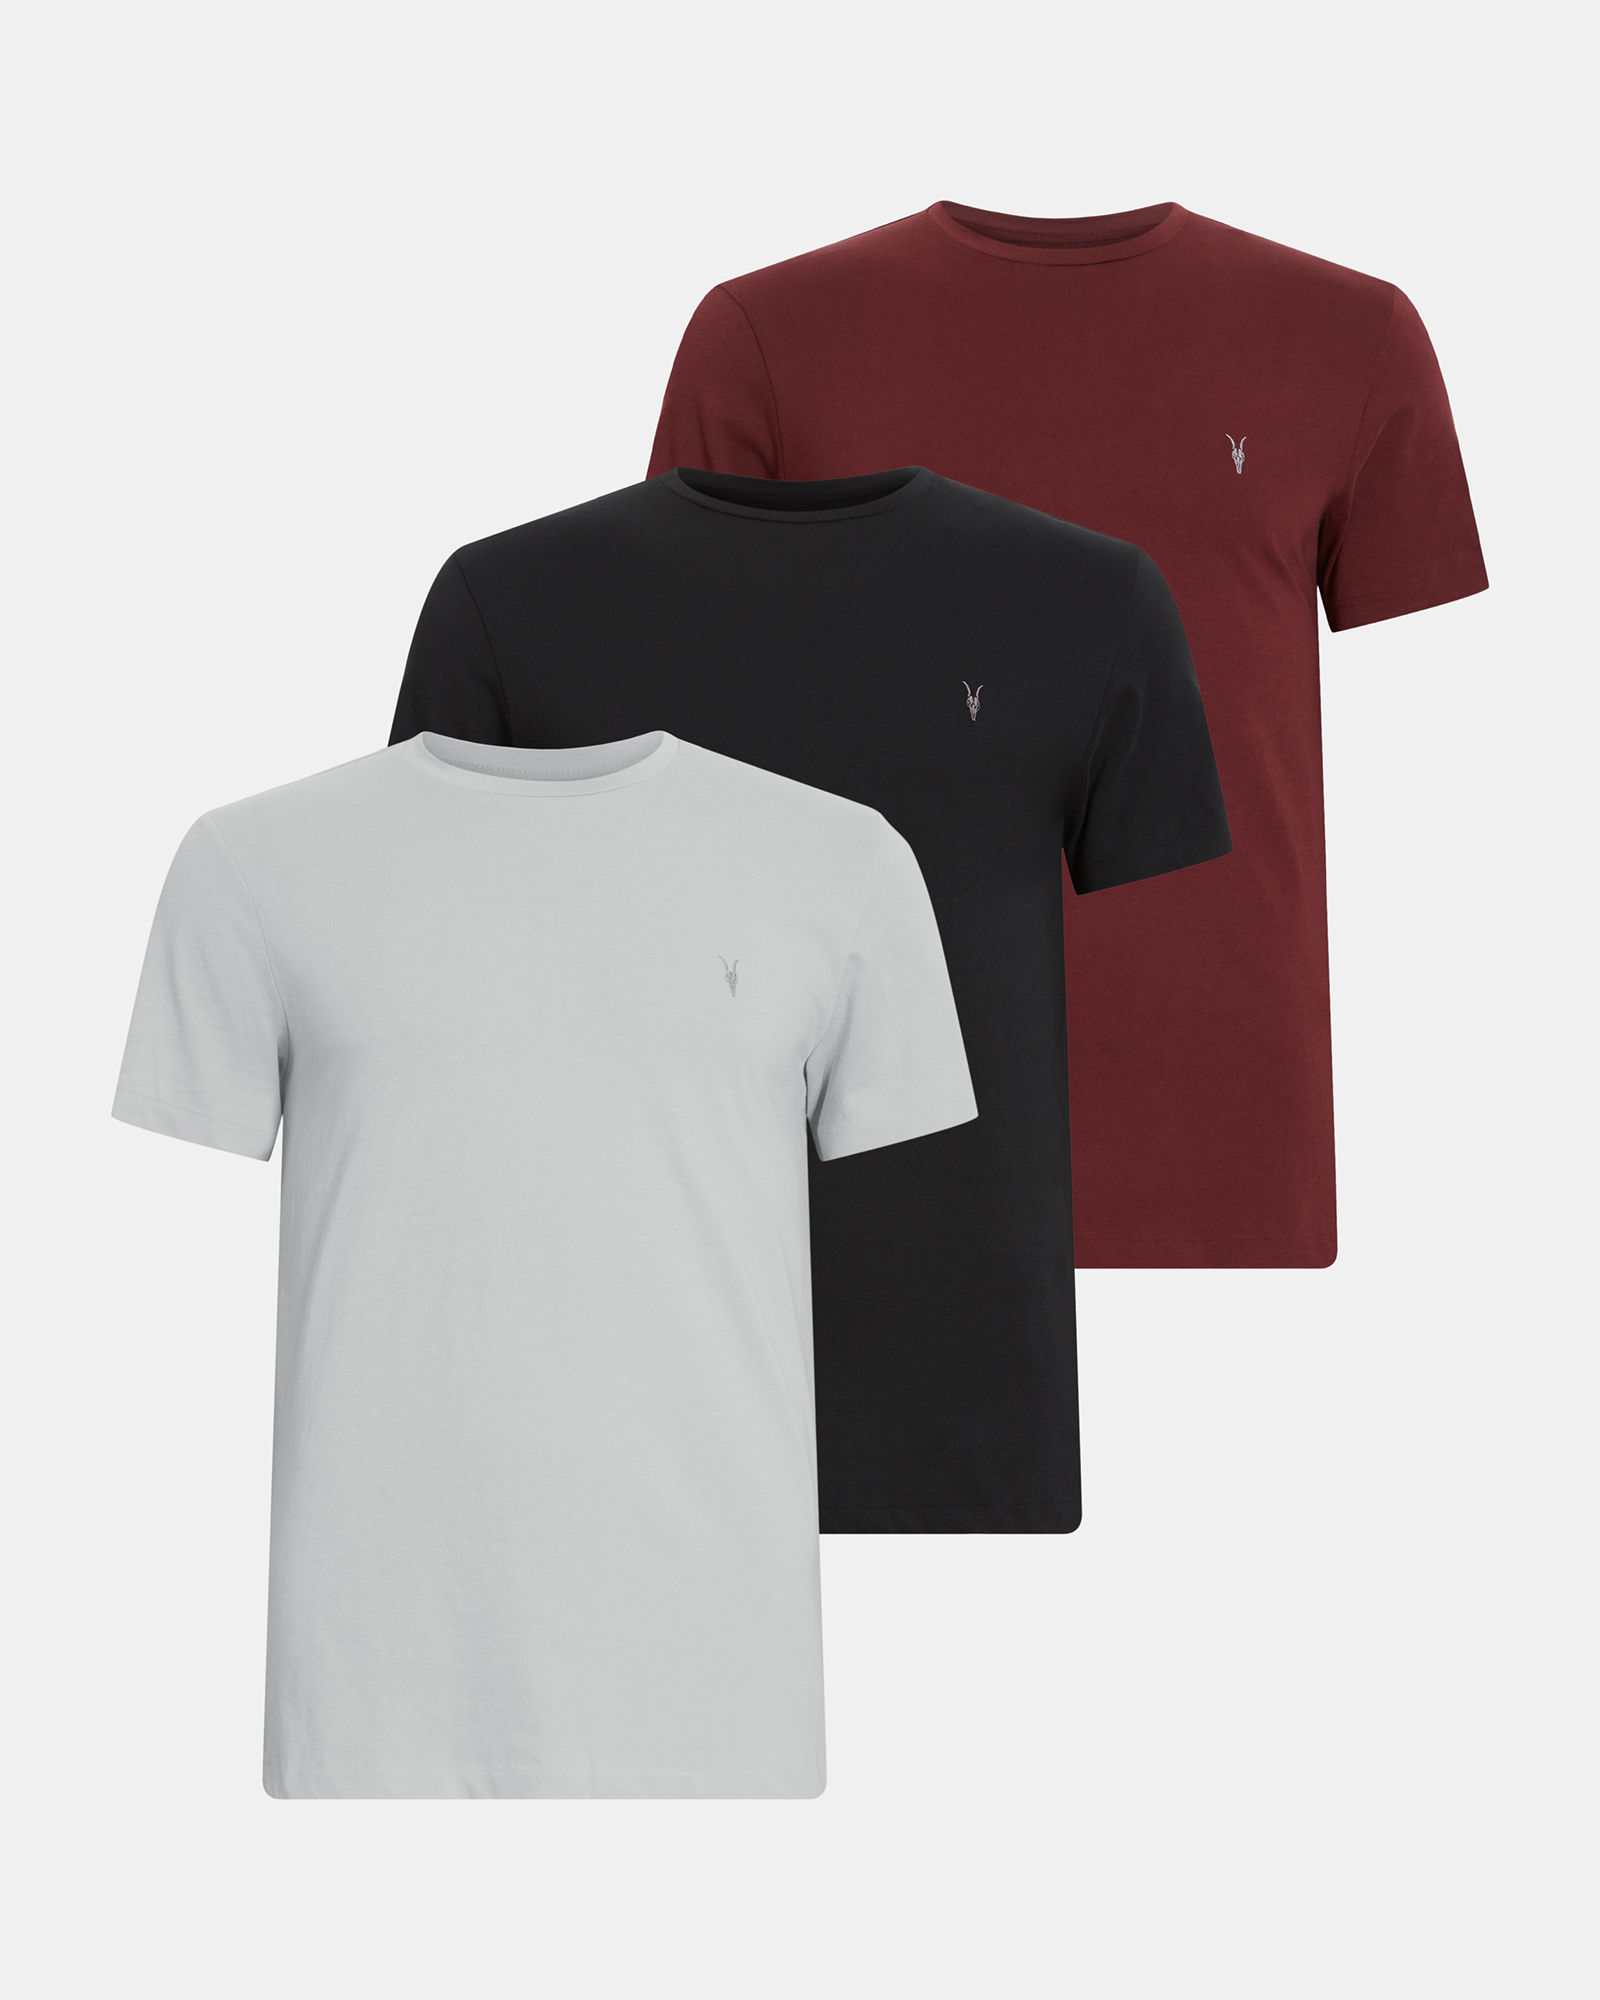 Allsaints Tonic Crew Ramskull T-shirts 3 Pack In Red